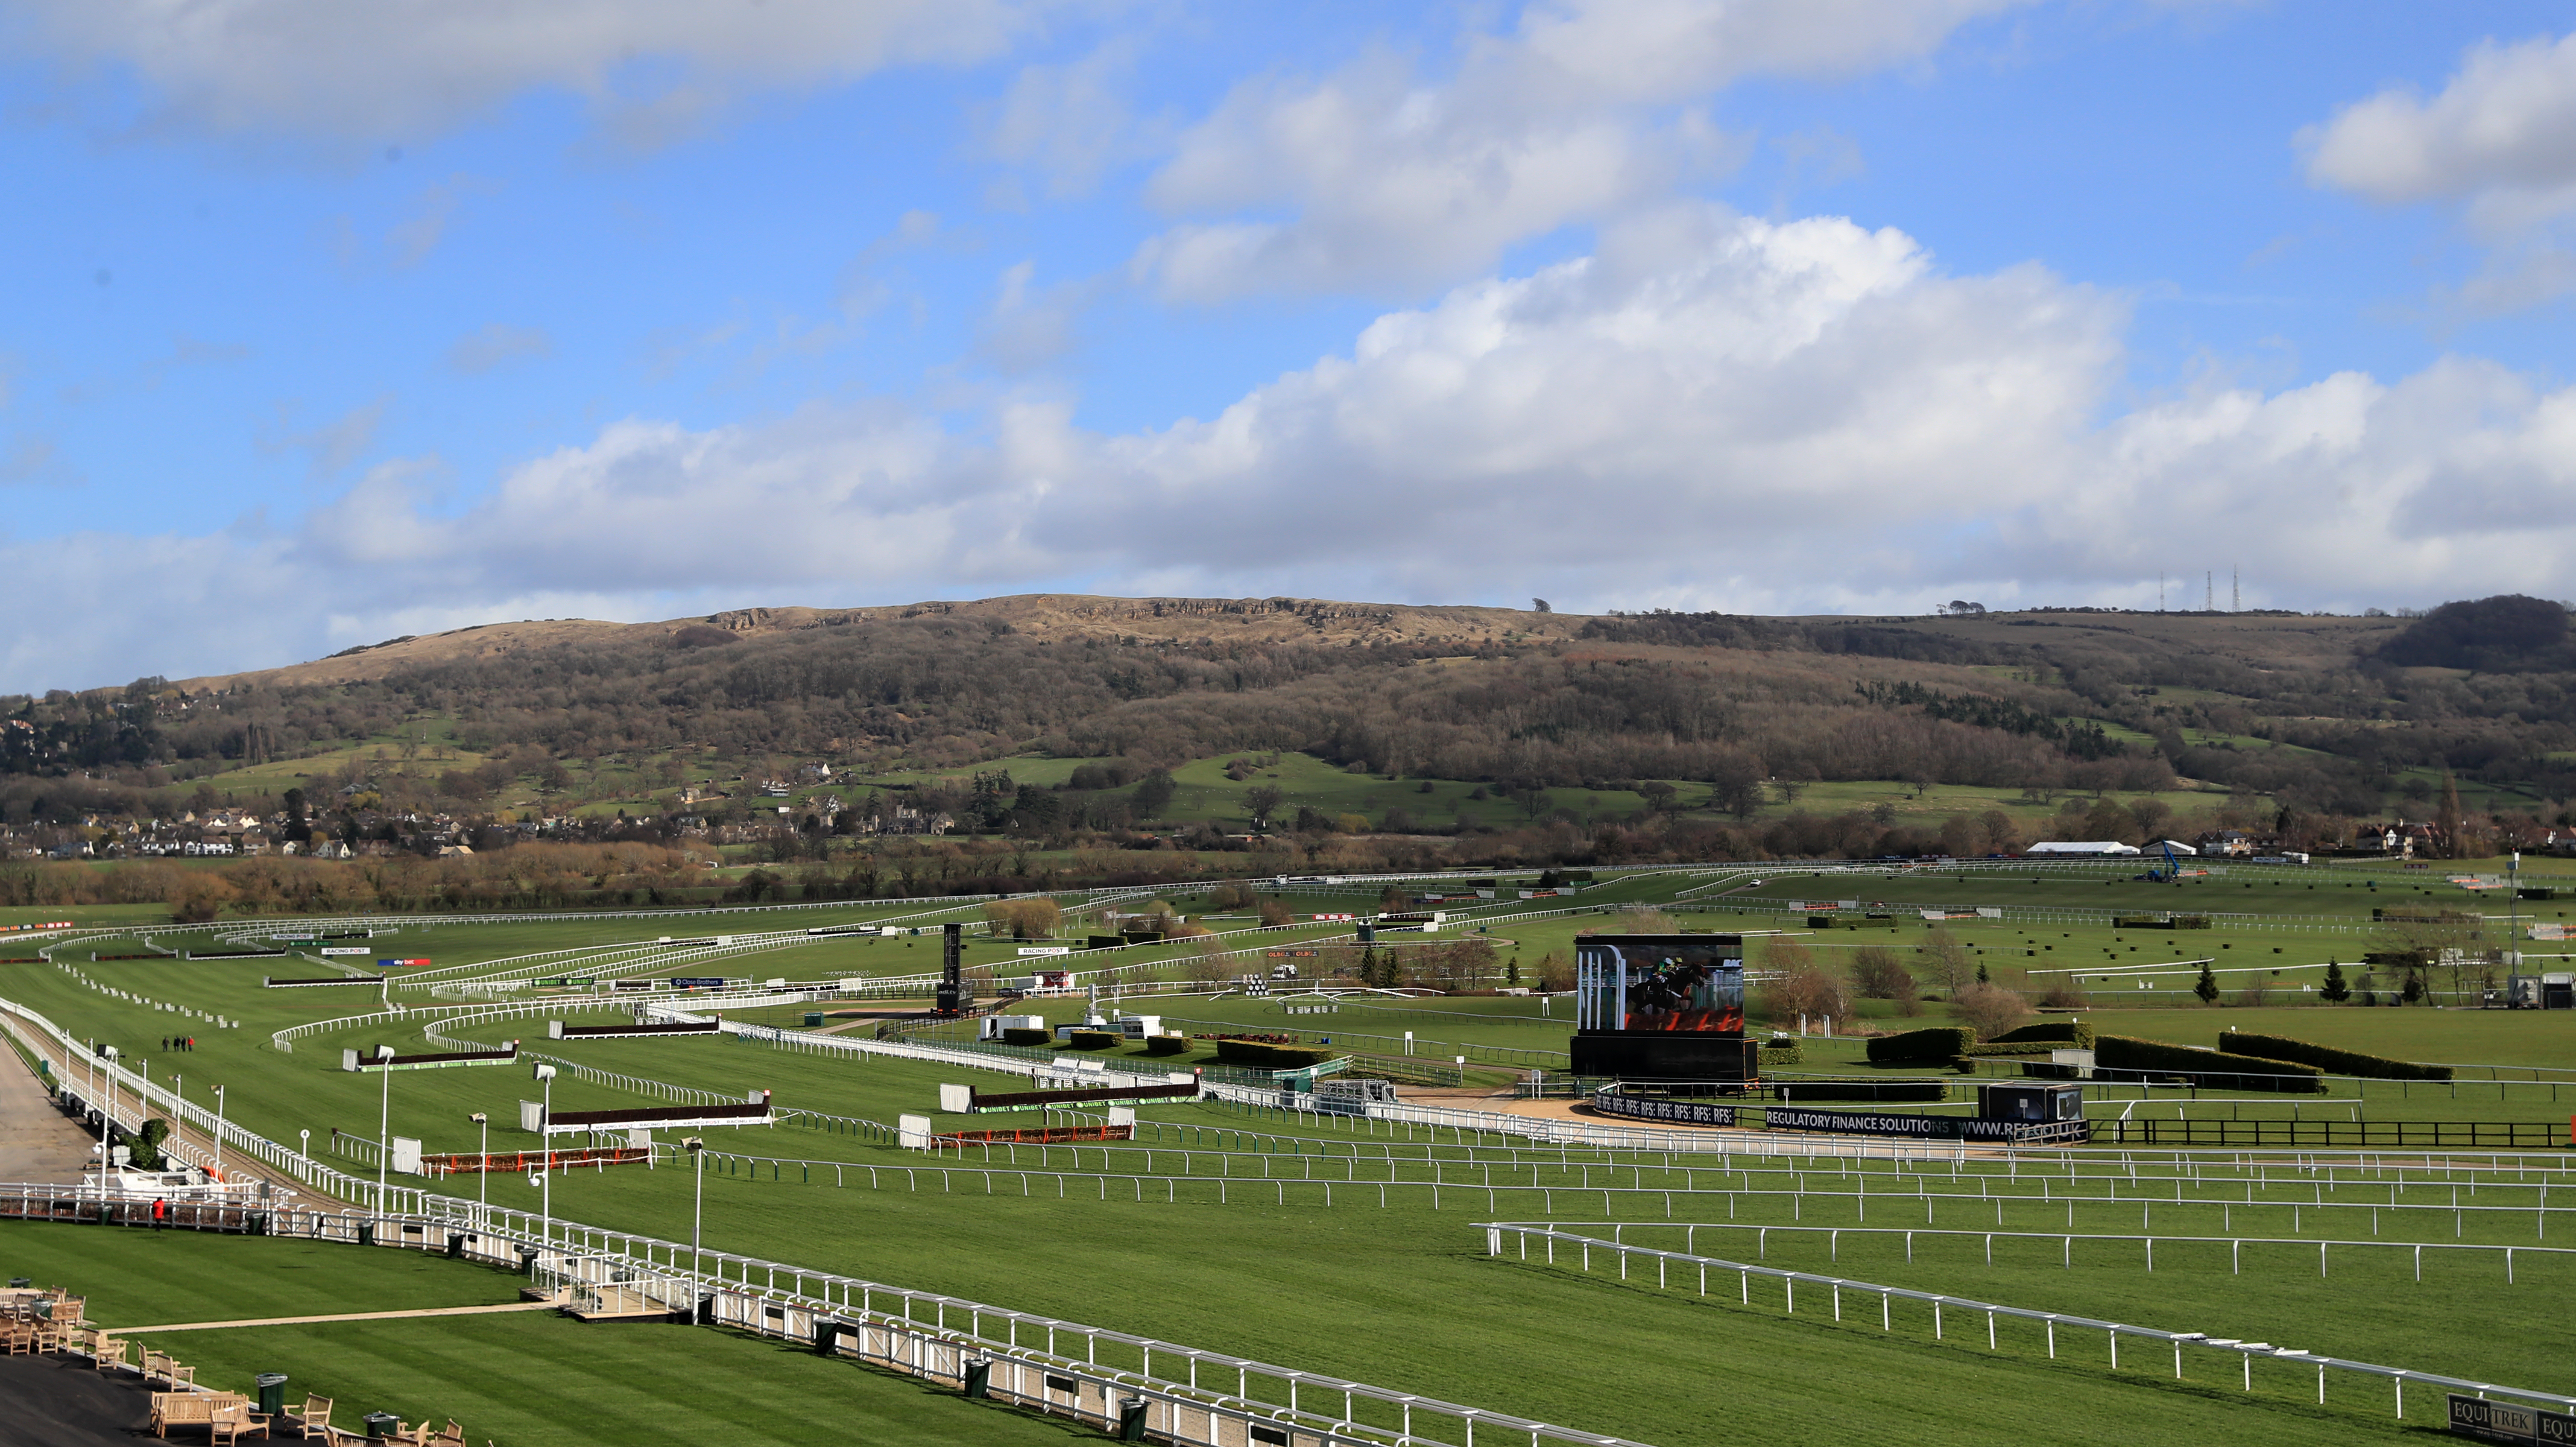 Fortunes will be won and lost at Cheltenham this week